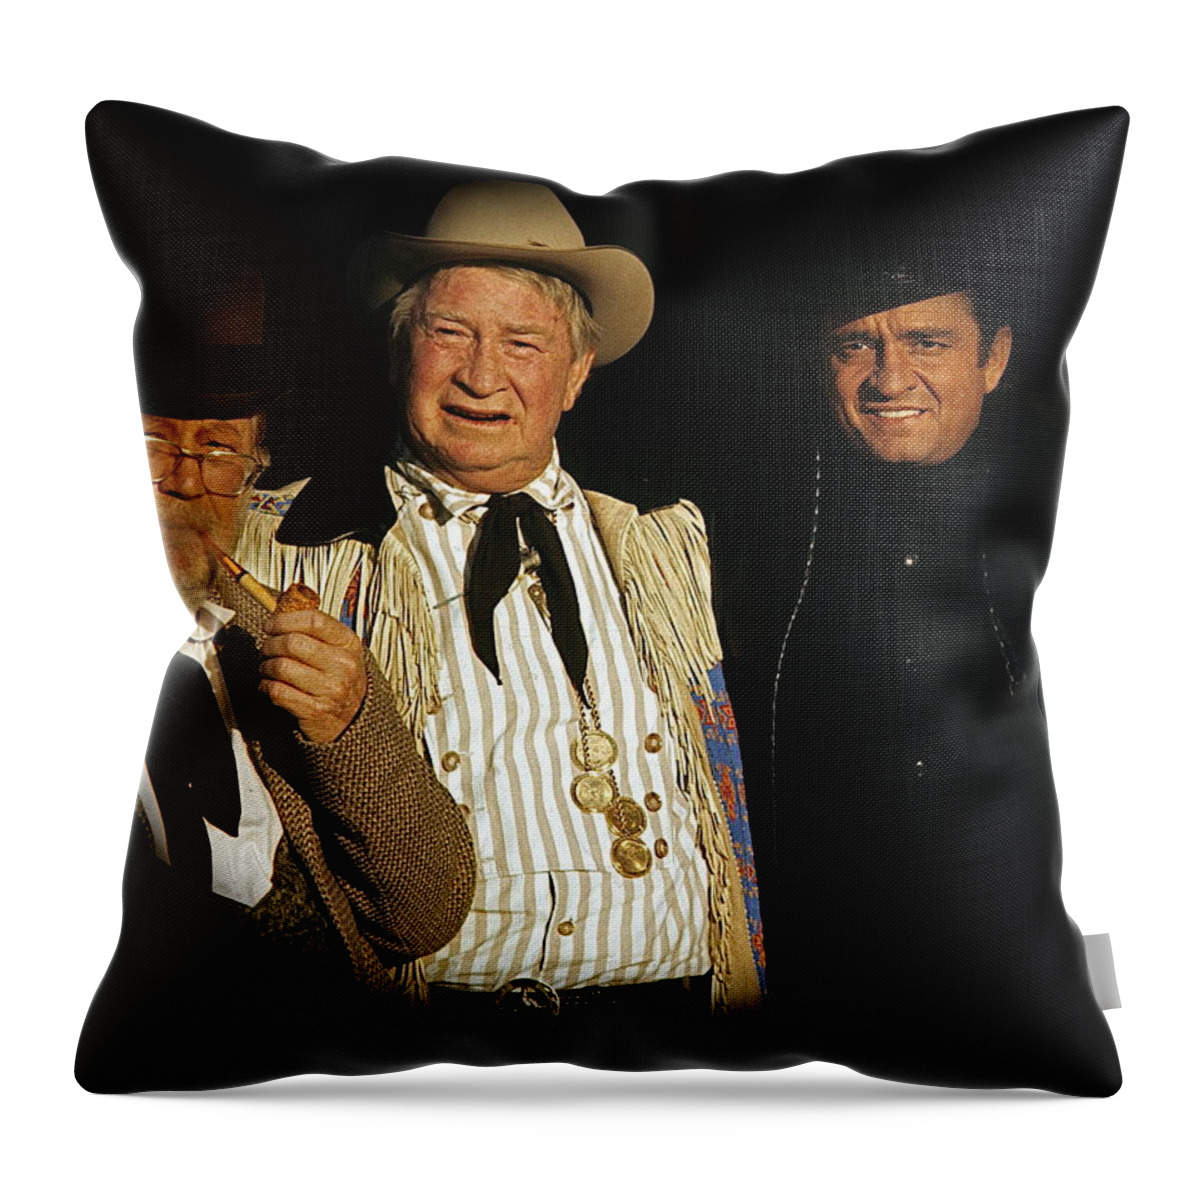 Edgar Buchanan Chills Wills Johnny Cash Porch Old Tucson Az Western Wear Andy Devine Duster Vignetting Throw Pillow featuring the photograph Edgar Buchanan Chills Wills Johnny Cash porch Old Tucson Arizona 1971-2008 by David Lee Guss